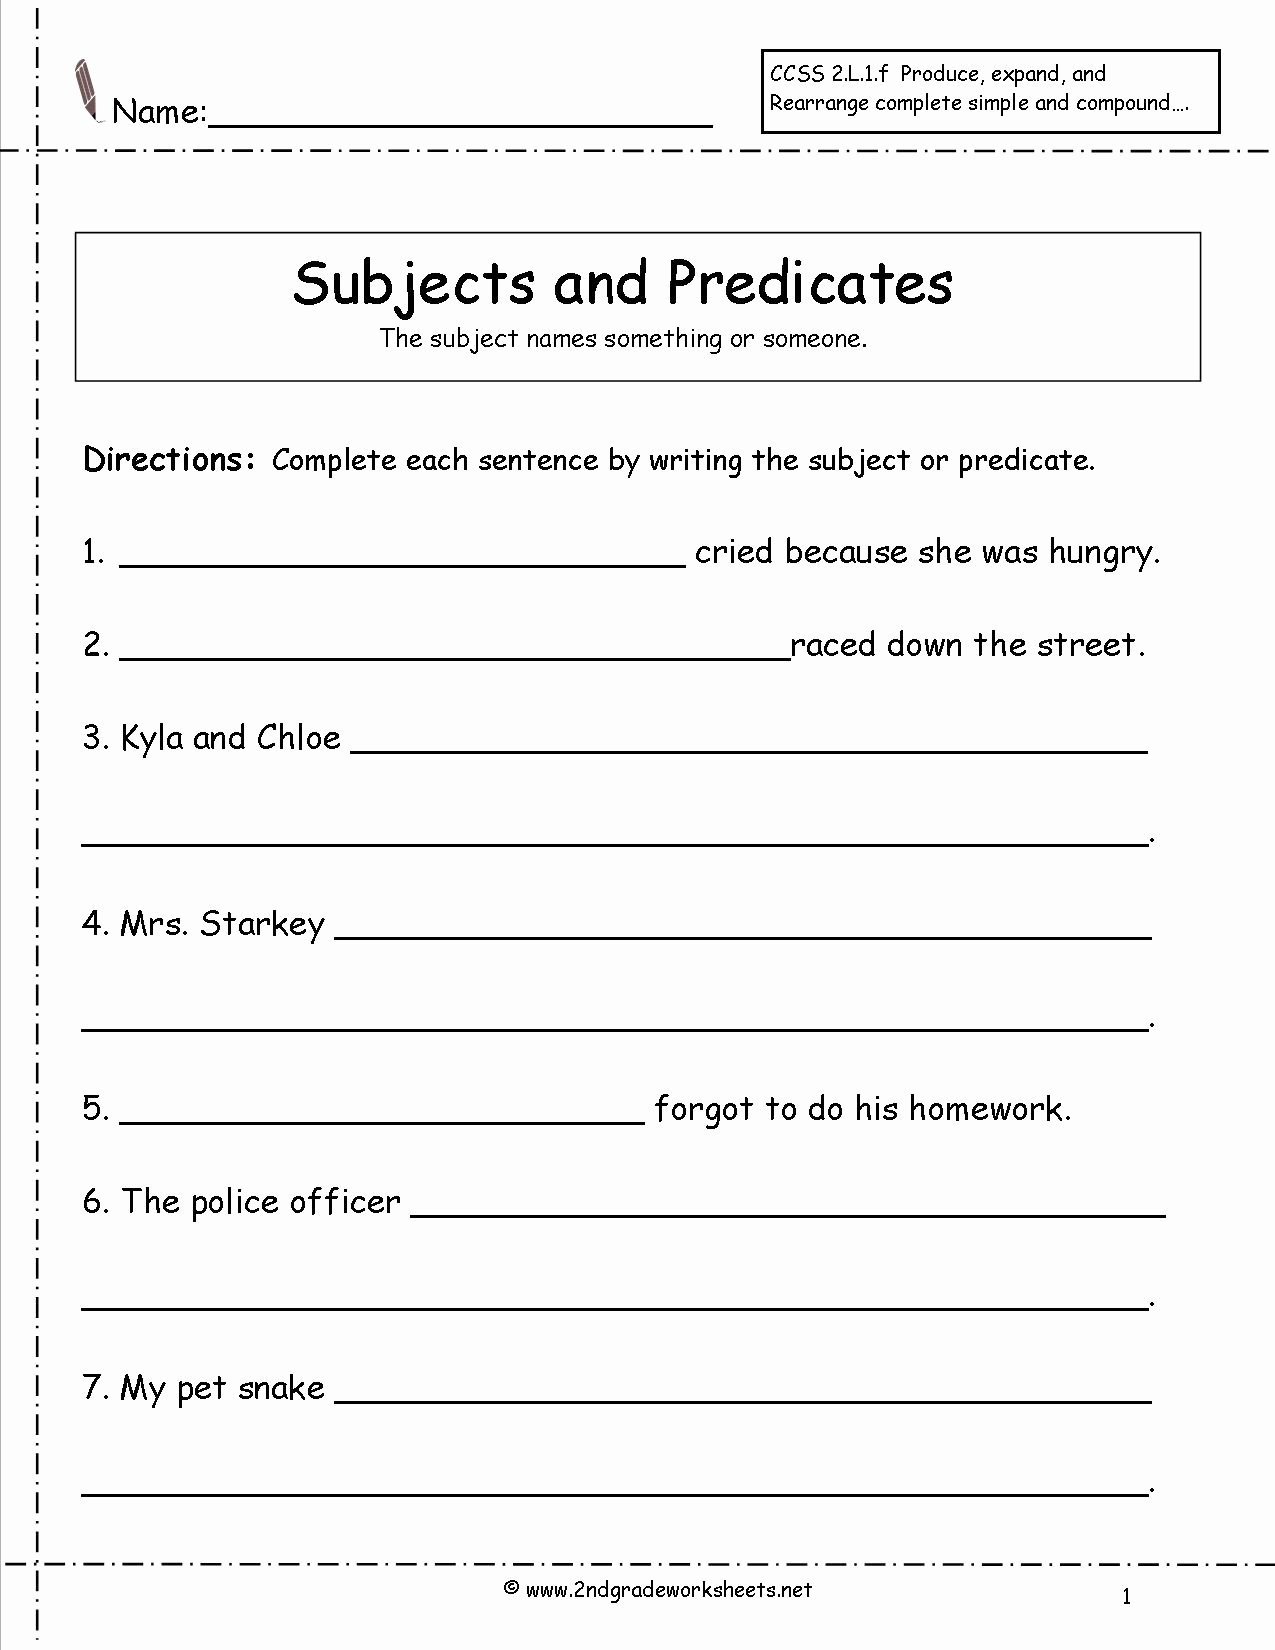 Subject and Predicate Worksheet Best Of Second Grade Sentences Worksheets Ccss 2 L 1 F Worksheets